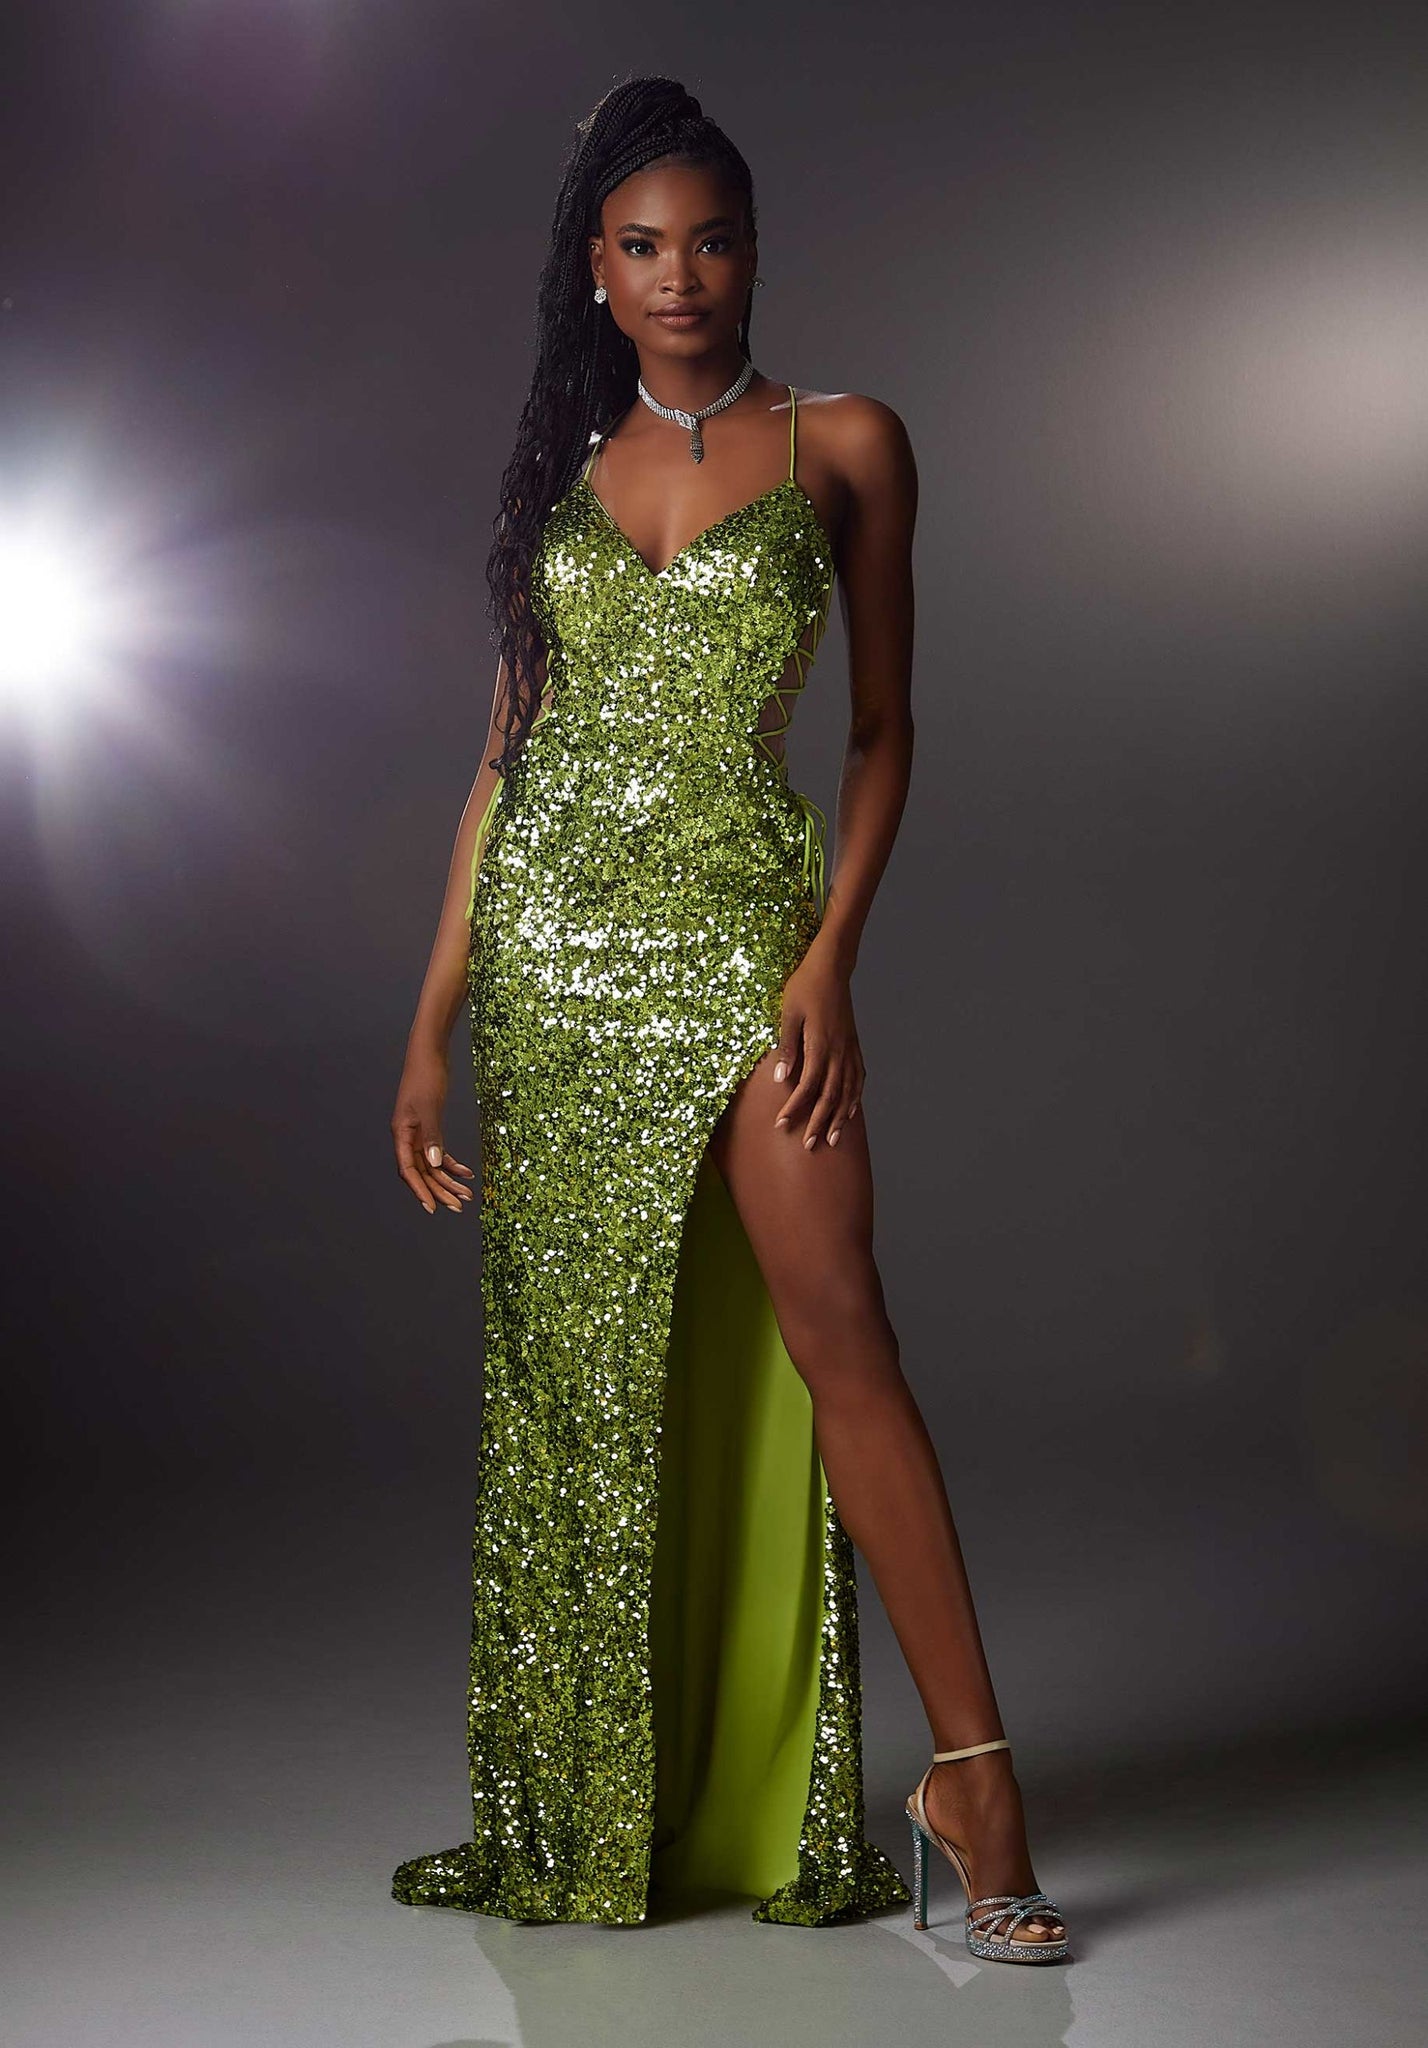 Sparkling allover sequin prom dress is both chic and edgy with illusion lace-up sides, a deep-v neckline, and spaghetti straps that crisscross in the back.